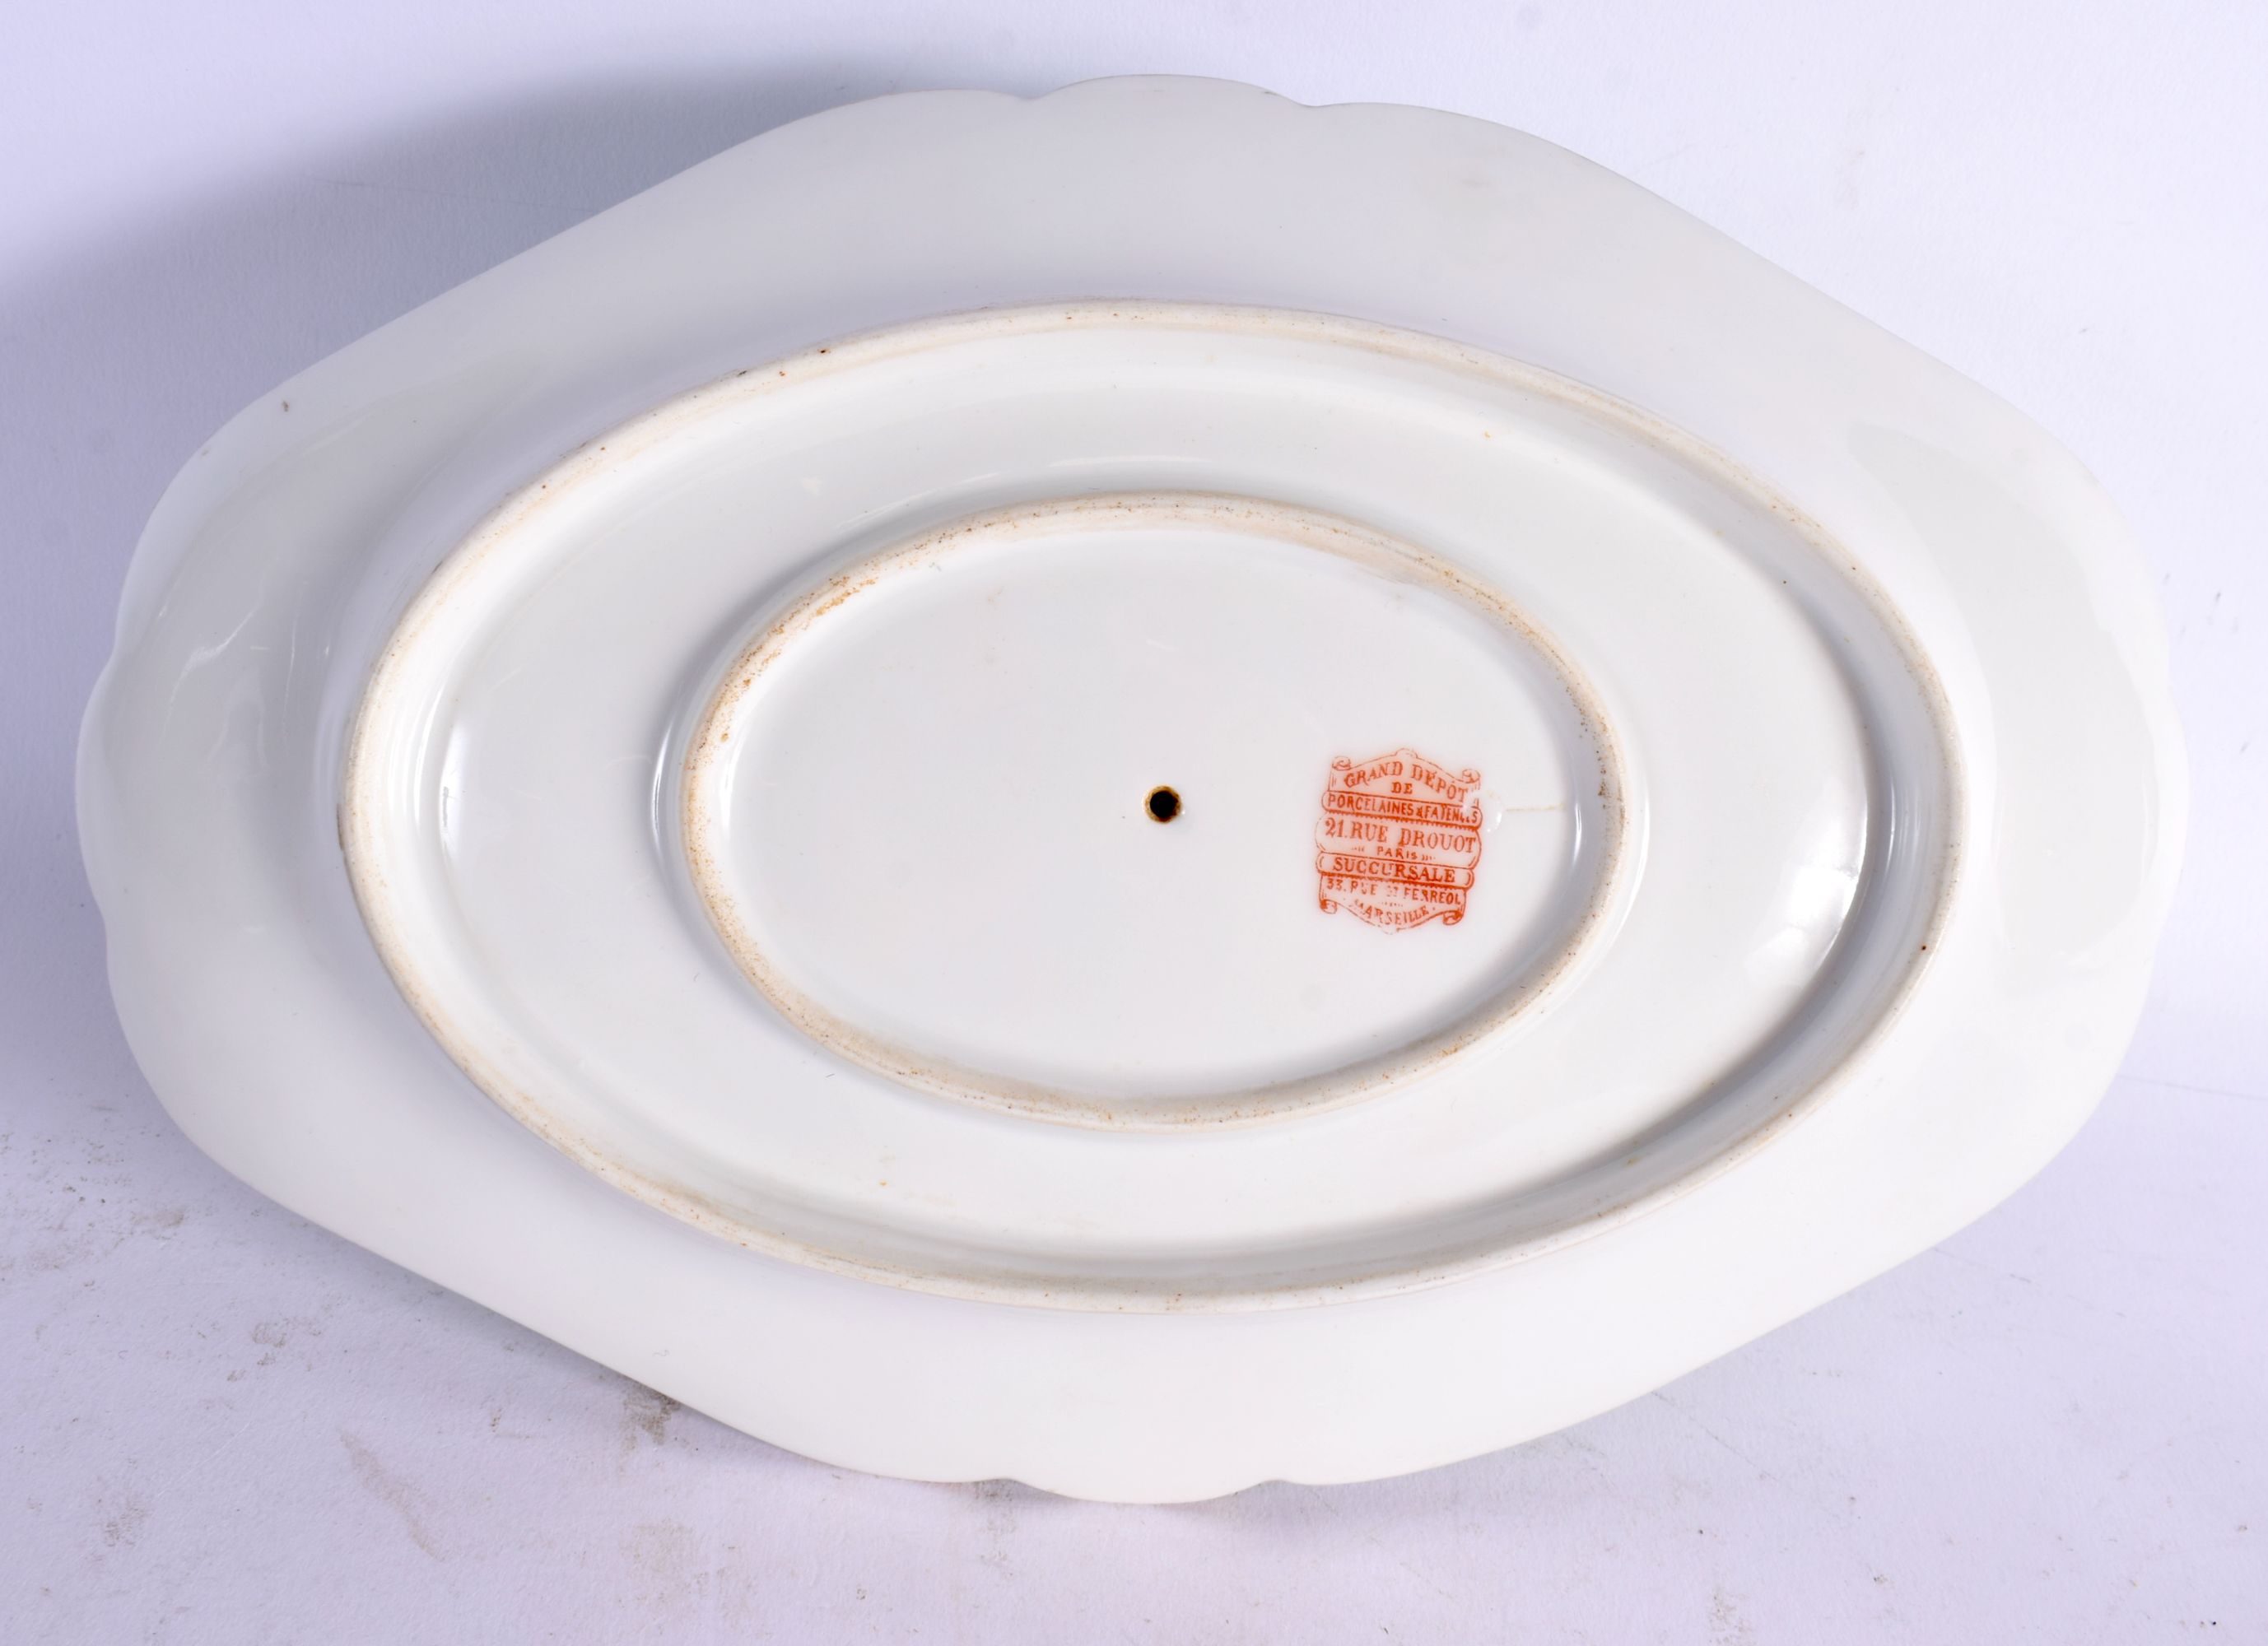 A LARGE AND EXTENSIVE LATE 19TH CENTURY FRENCH PORCELAIN DINNER SERVICE painted with a monogram. Lar - Image 14 of 14